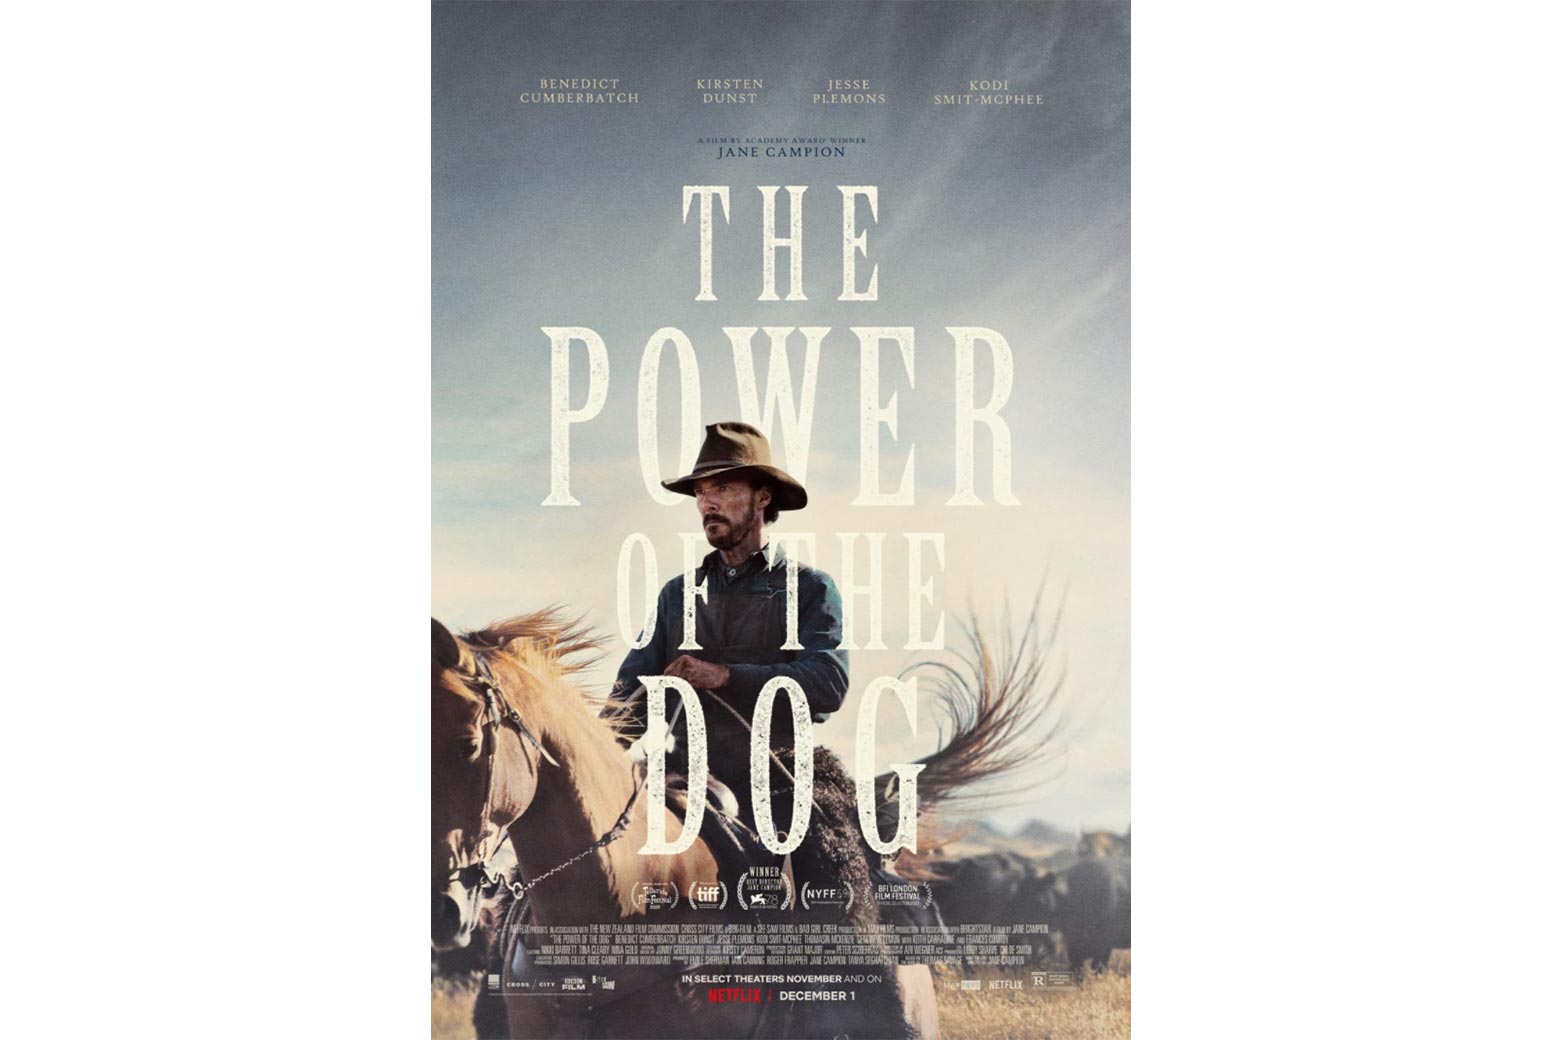 The Power of the Dog poster.